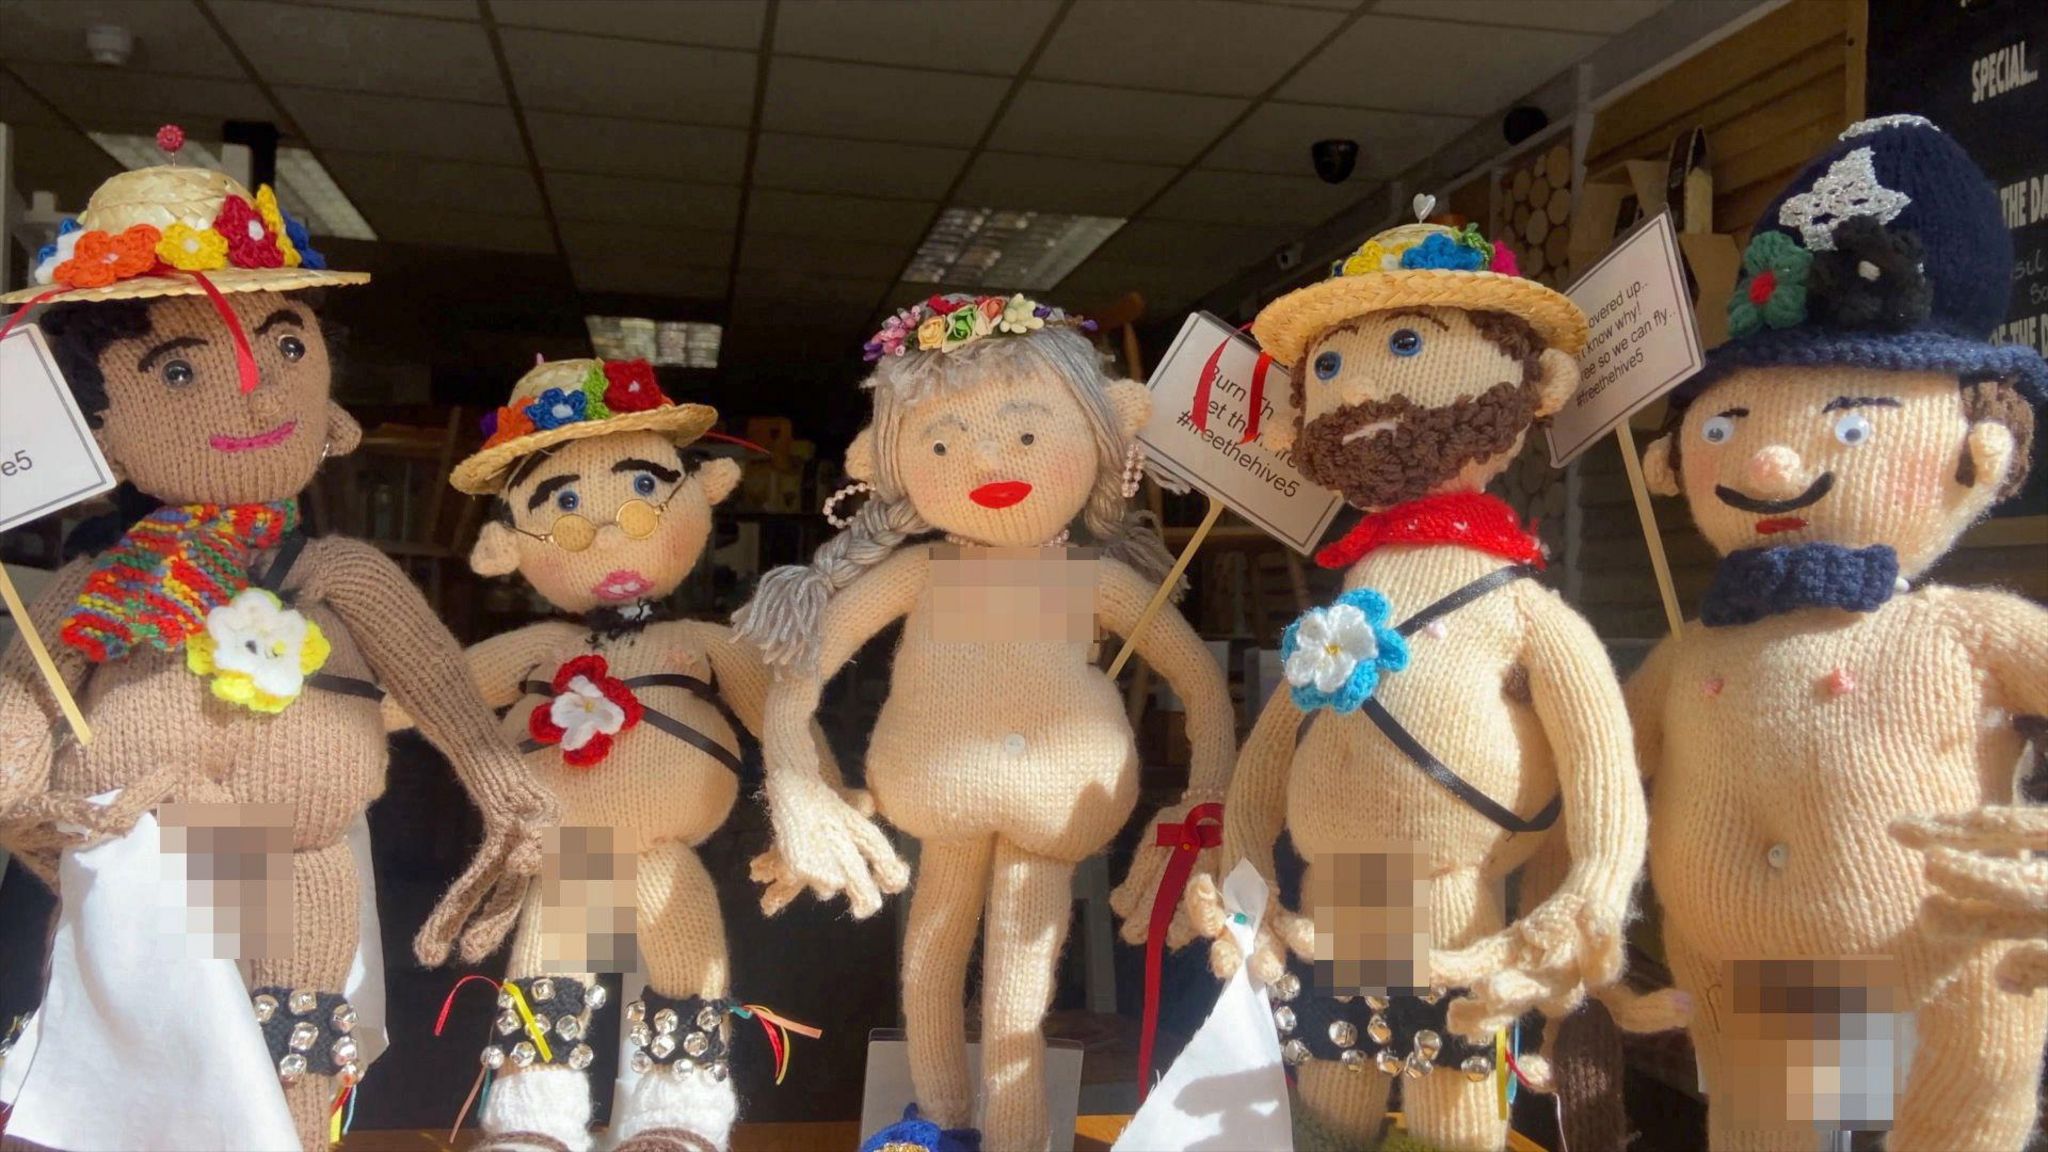 ‘Nudey knits’ in café window censored after complaints